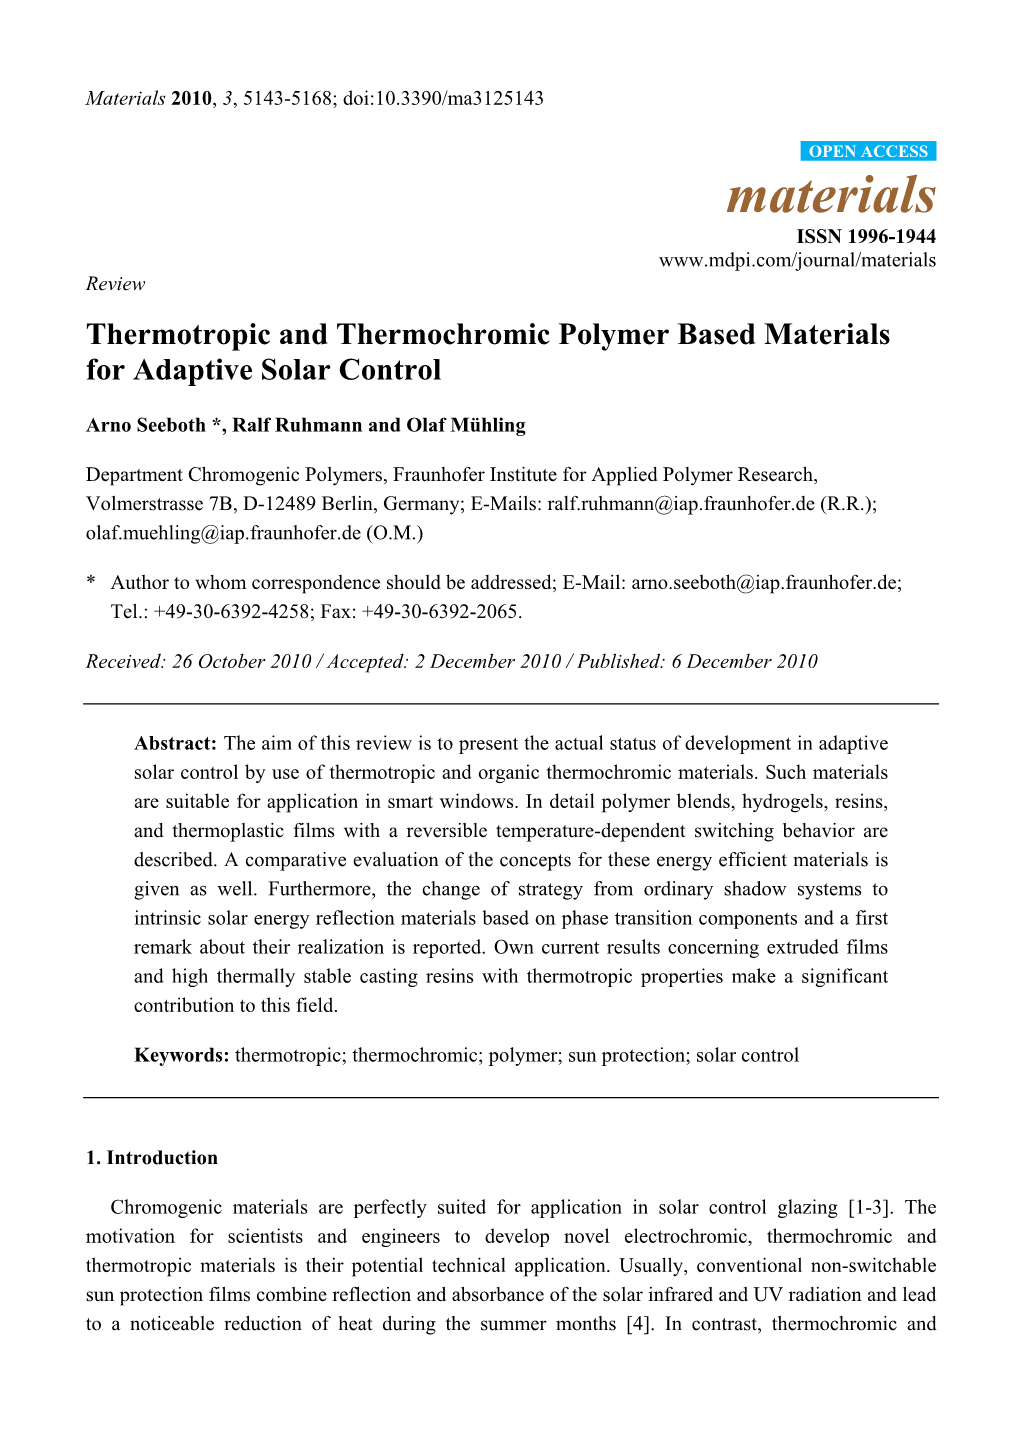 Thermotropic and Thermochromic Polymer Based Materials for Adaptive Solar Control